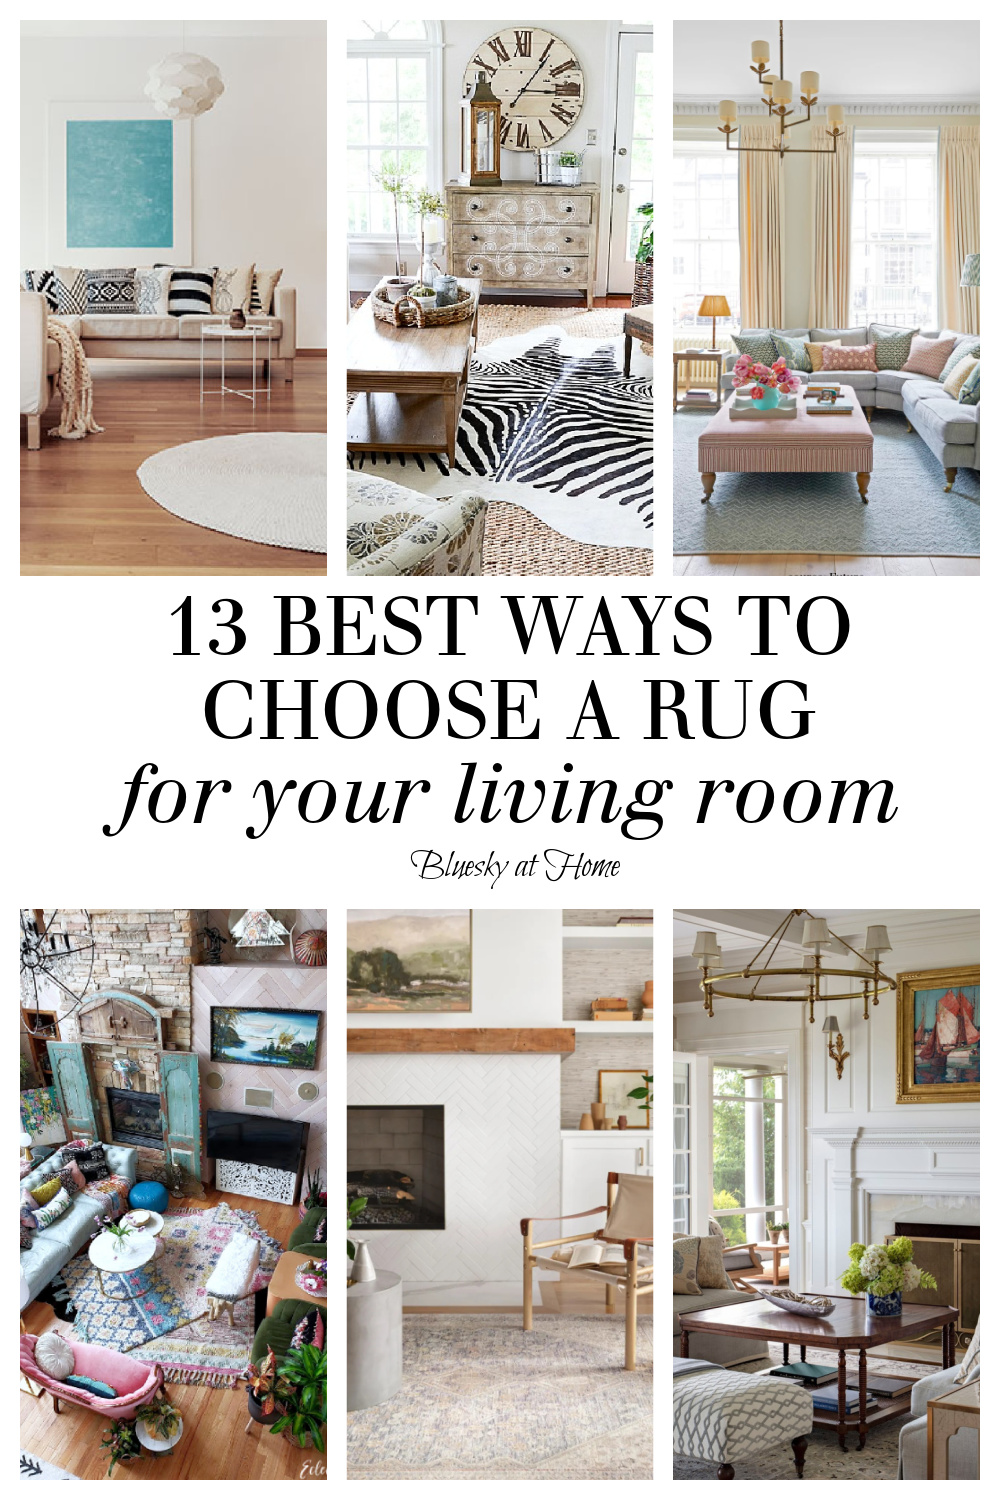 13 Best Ways to Choose a Rug - Bluesky at Home